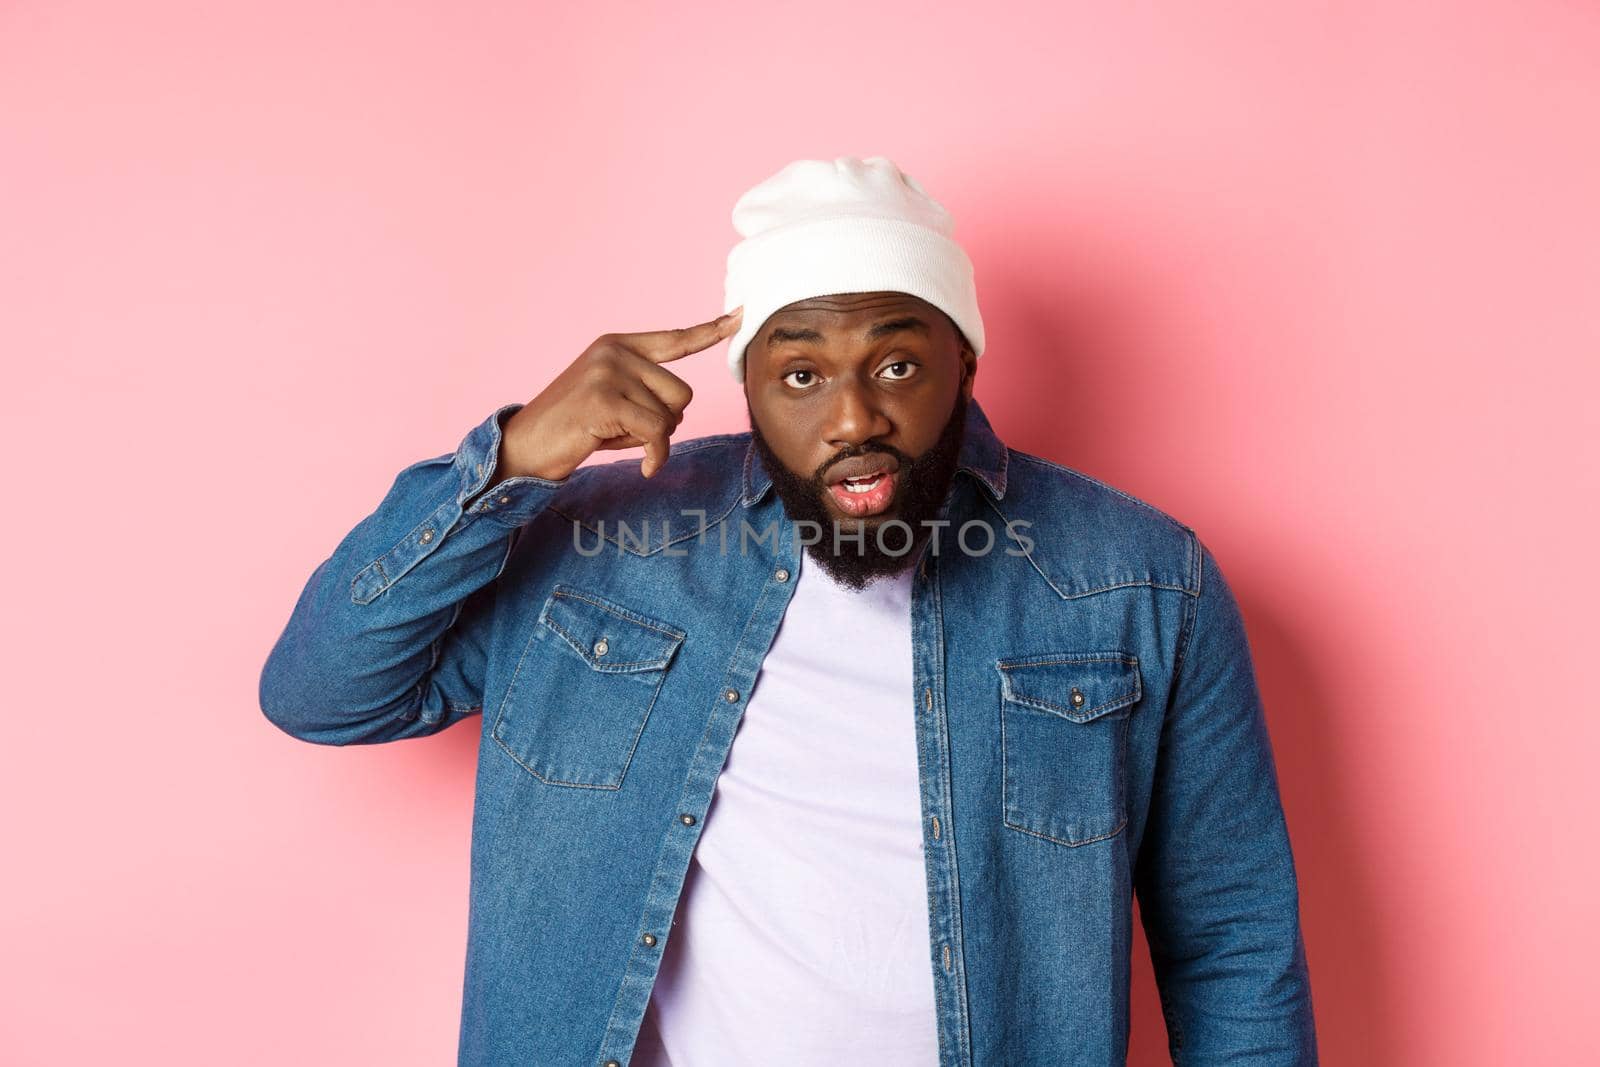 Annoyed and pissed-off african-american man pointing finger at head, scolding someone stupid, staring bothered at camera, pink background.